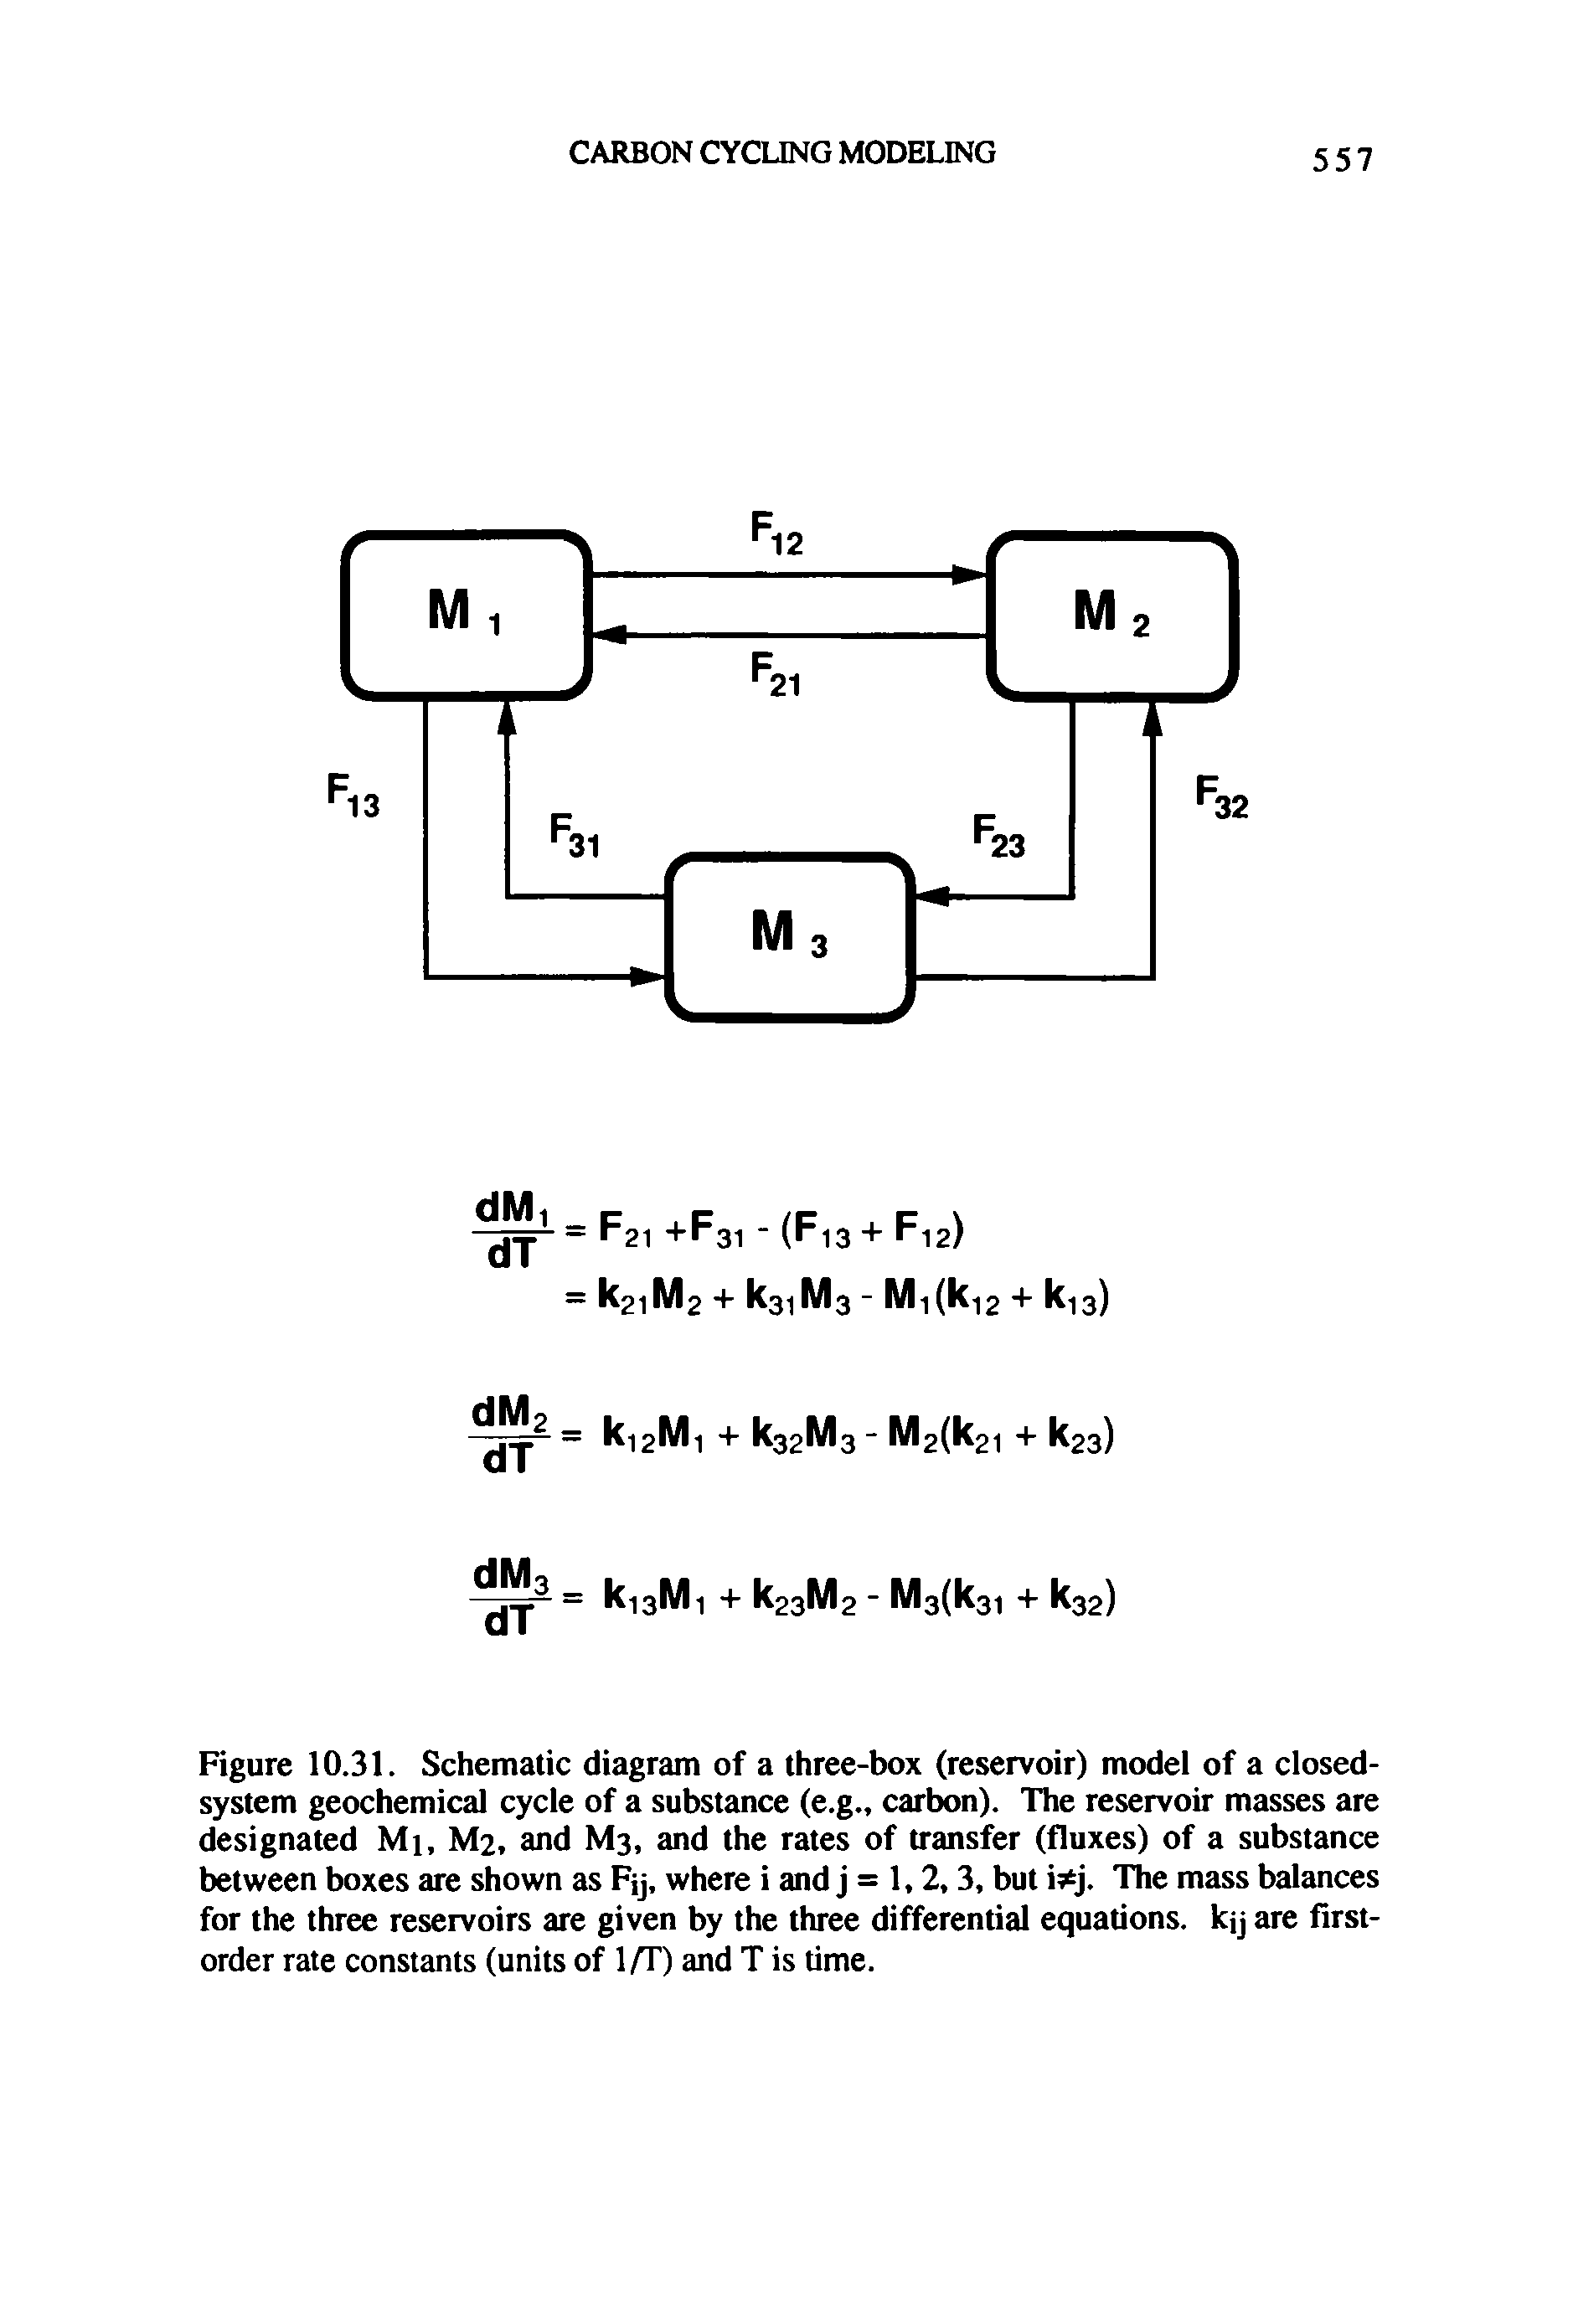 Figure 10.31. Schematic diagram of a three-box (reservoir) model of a closed-system geochemical cycle of a substance (e.g., carbon). The reservoir masses are designated Mi, M2, and M3, and the rates of transfer (fluxes) of a substance between boxes are shown as Fy, where i and j = 1,2,3, but i j. The mass balances for the three reservoirs are given by the three differential equations, kjj are first-order rate constants (units of 1/T) and T is time.